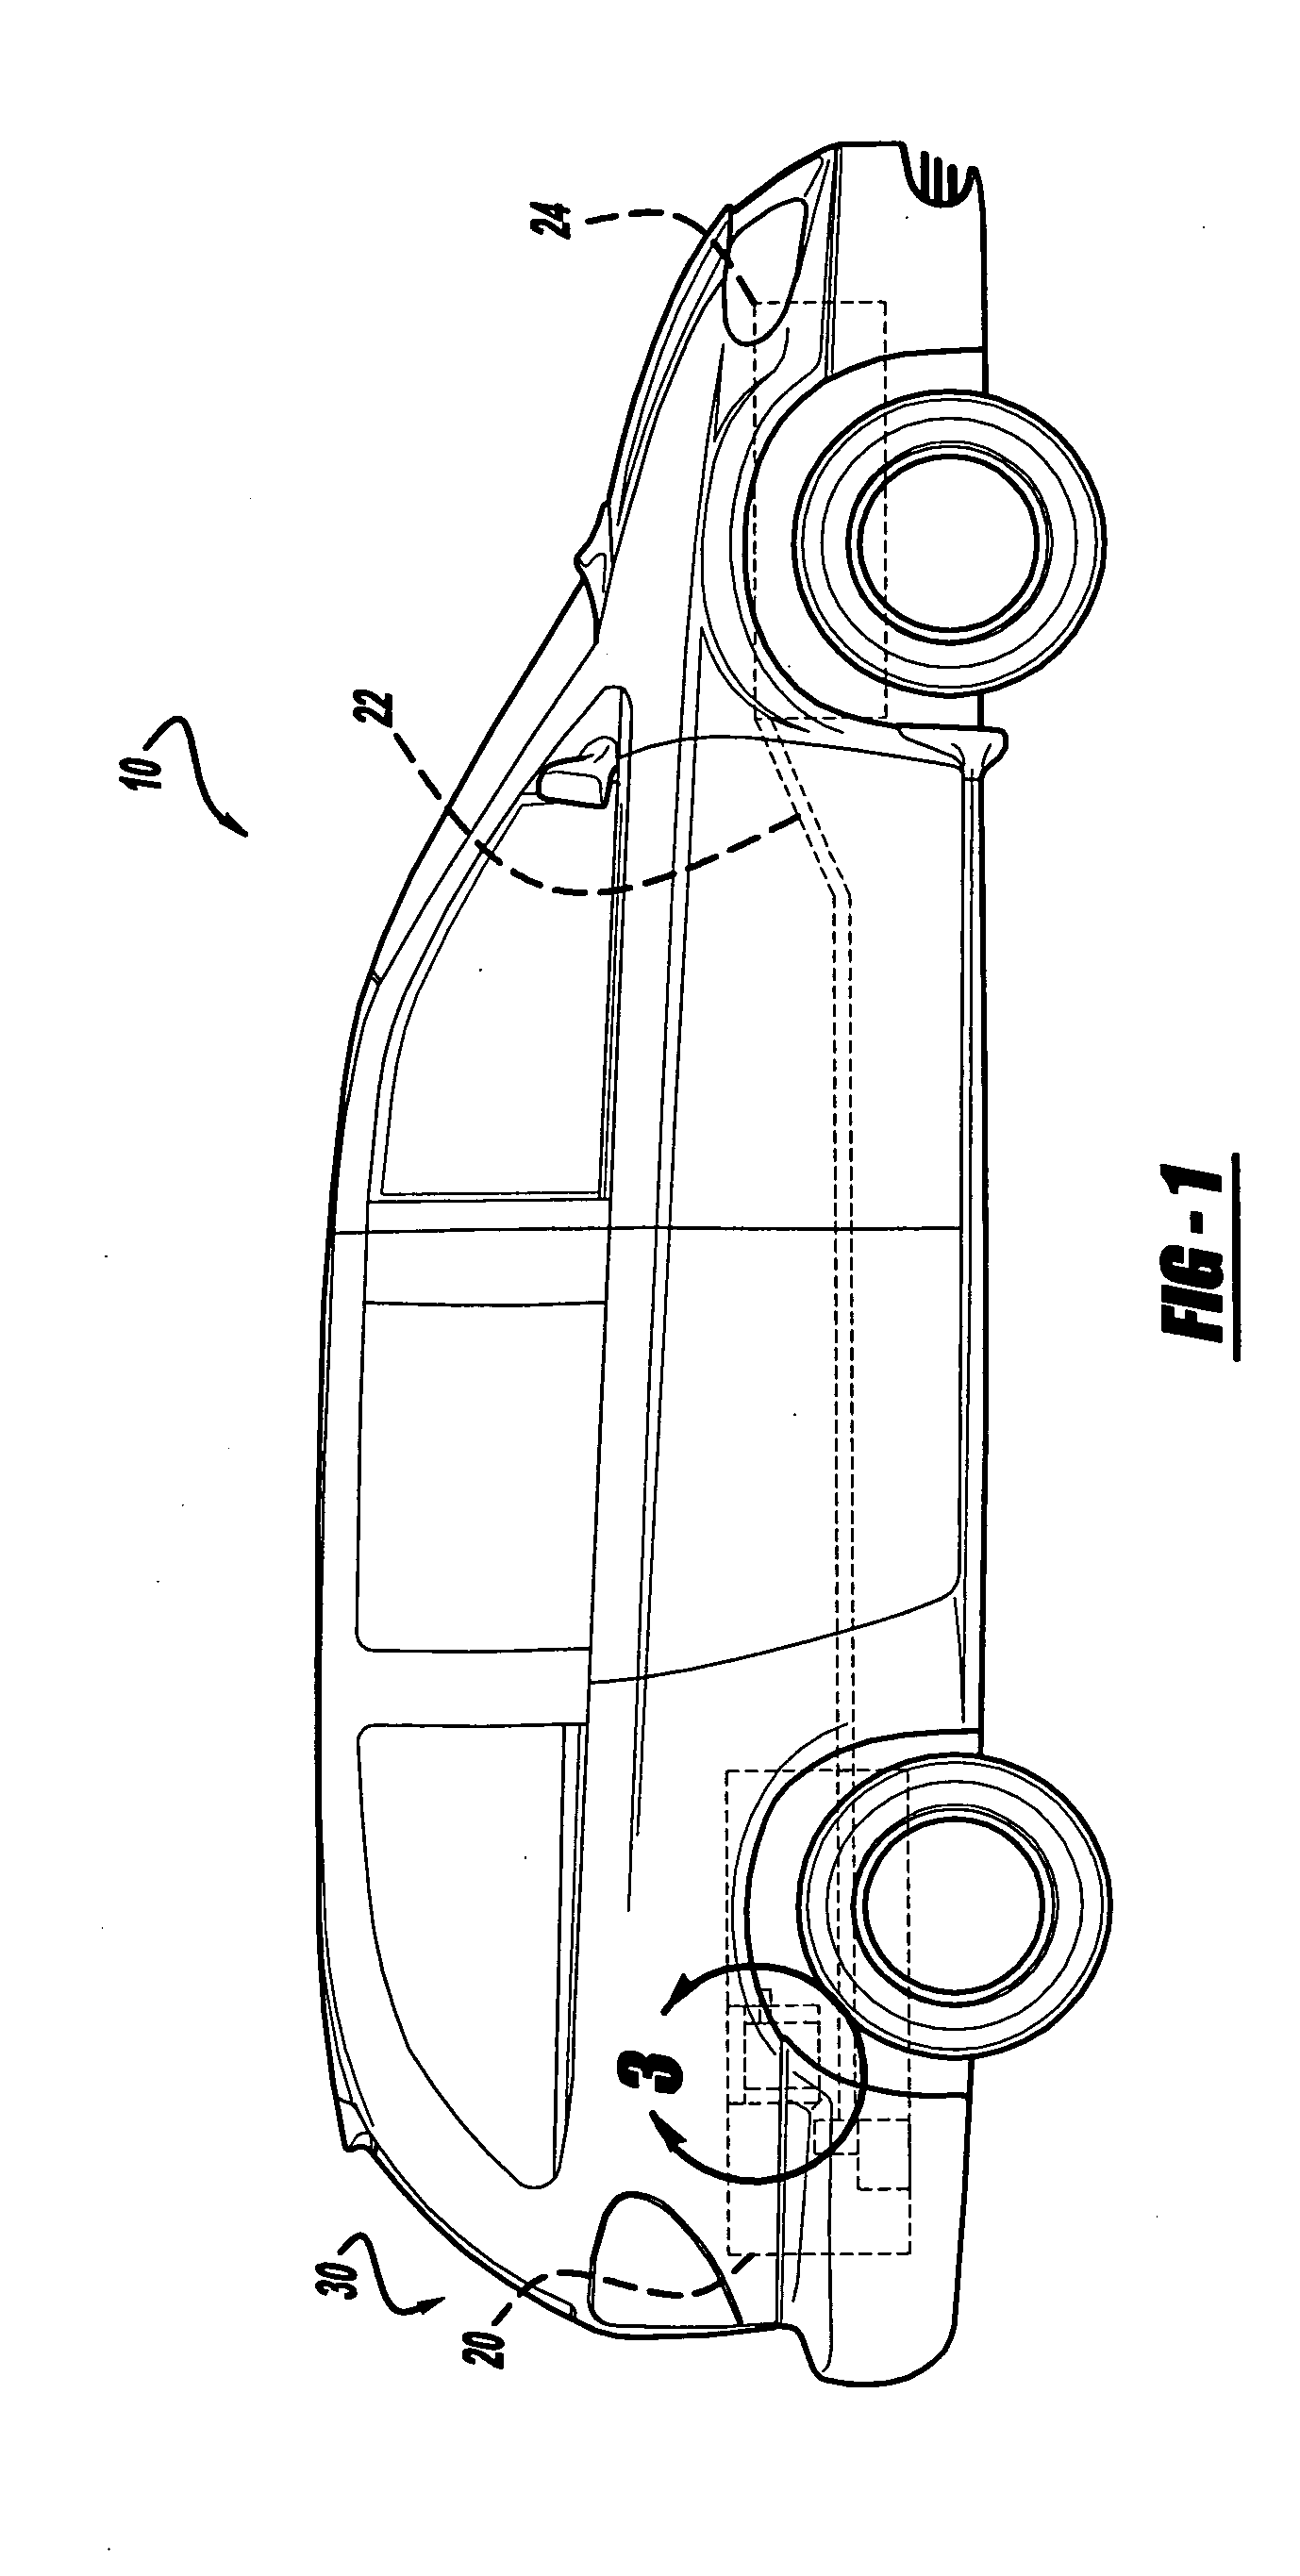 Method of welding a component inside a hollow vessel